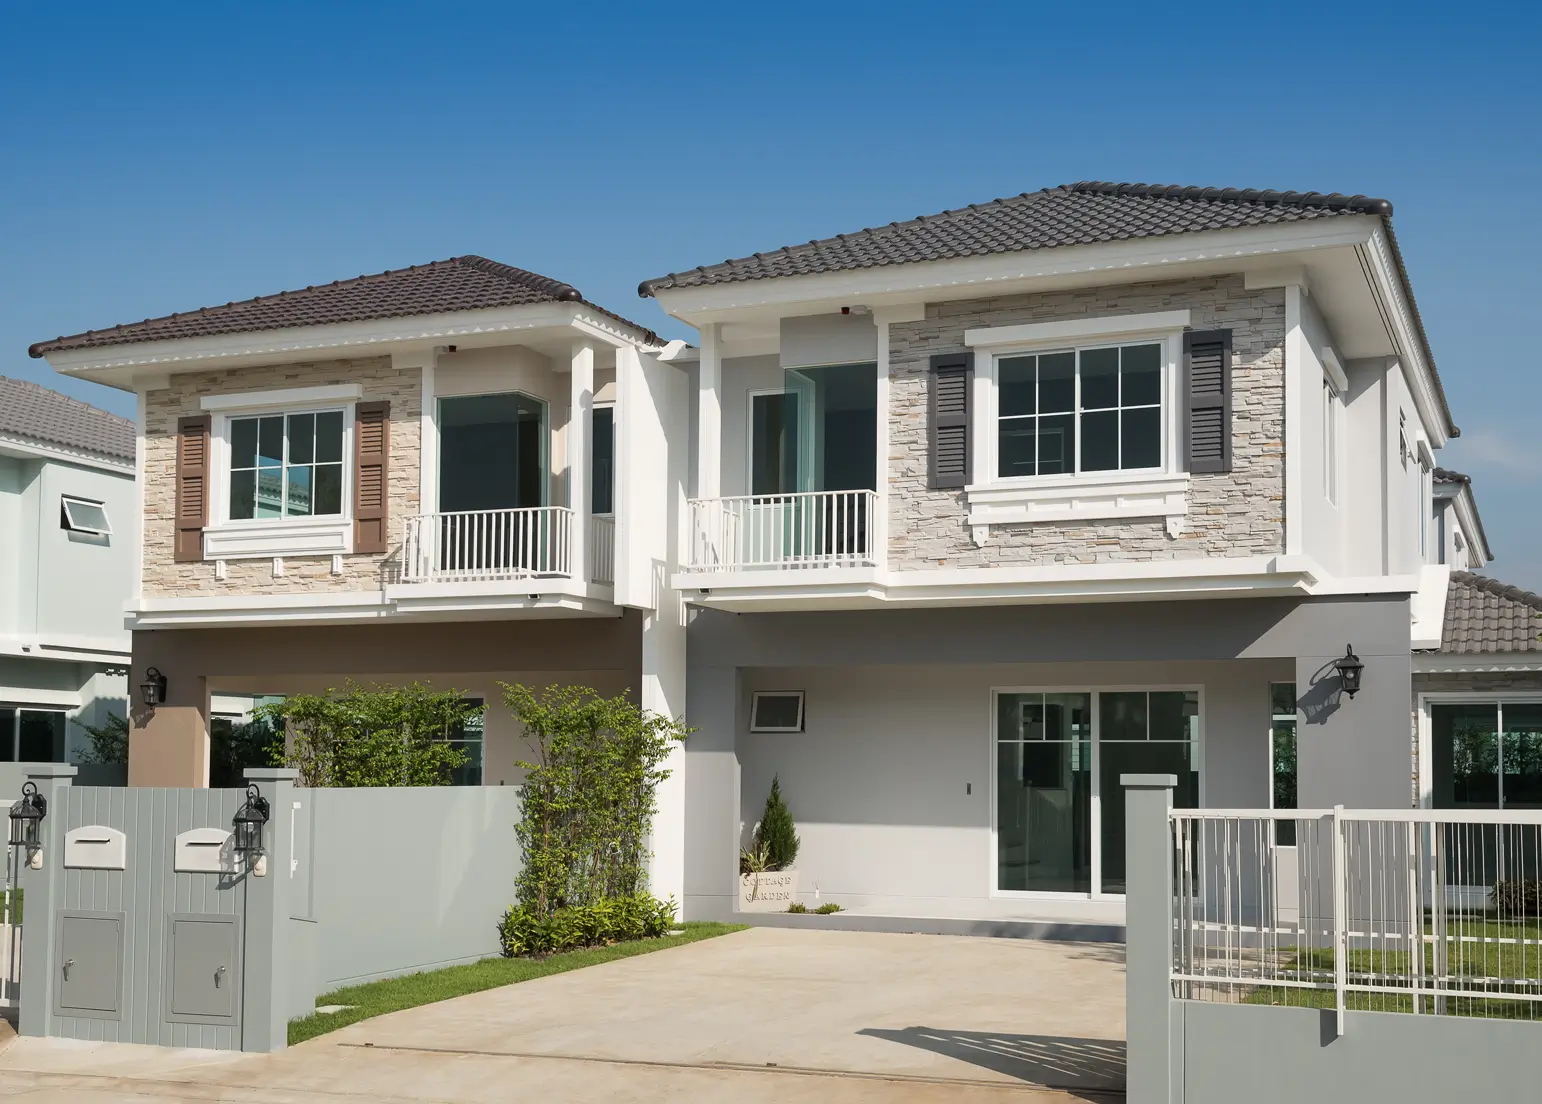 townhomes_370x265